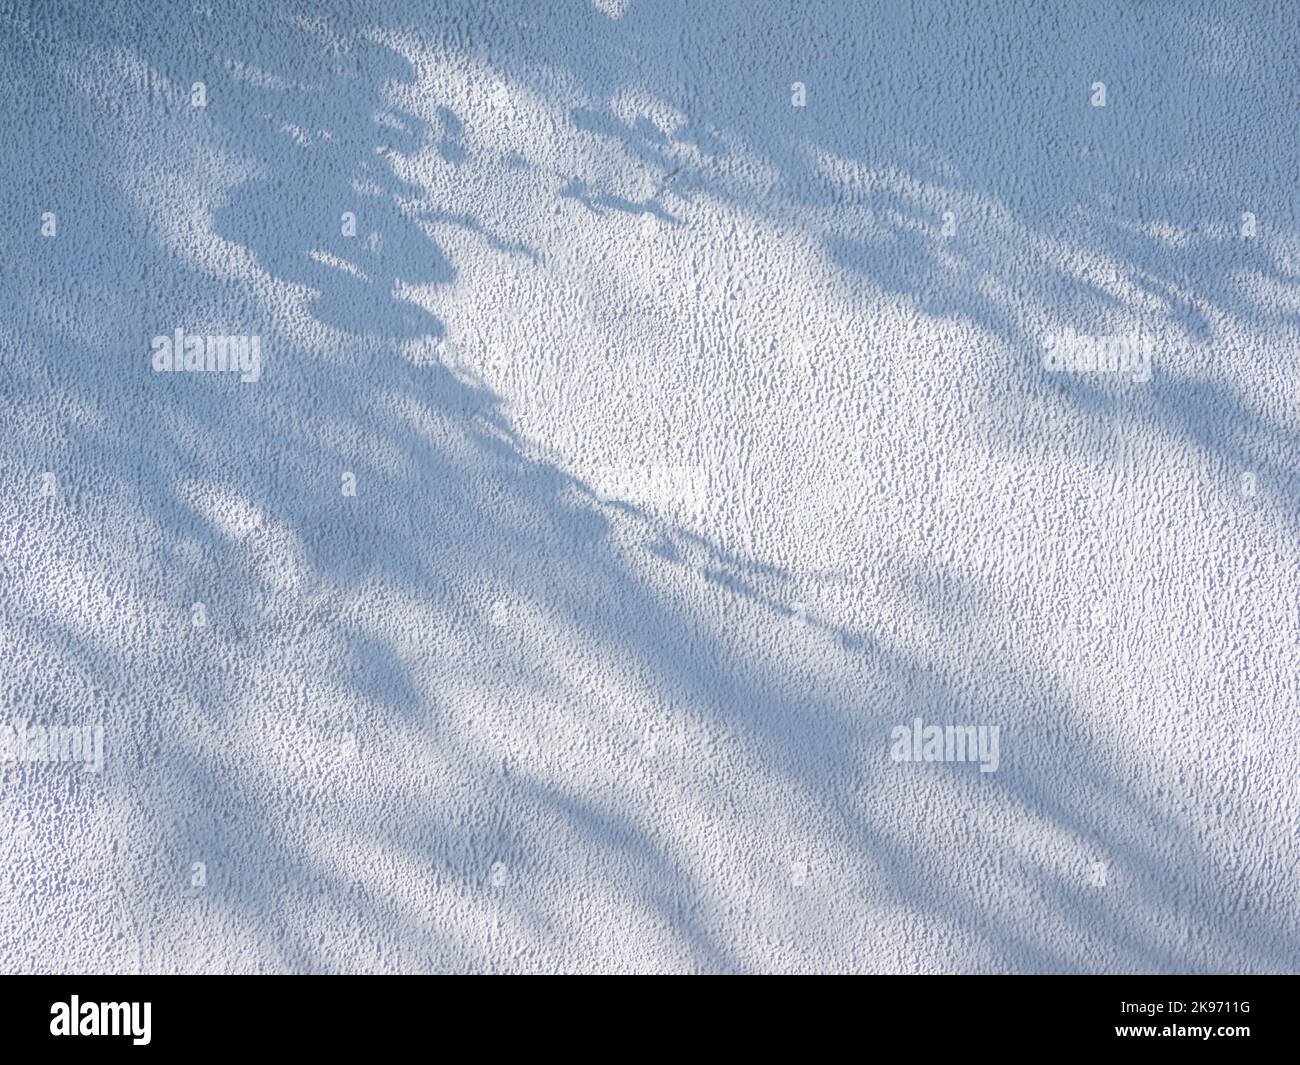 Lacy shadows from trees on white wall. Abstract background with concrete texture. Stock Photo